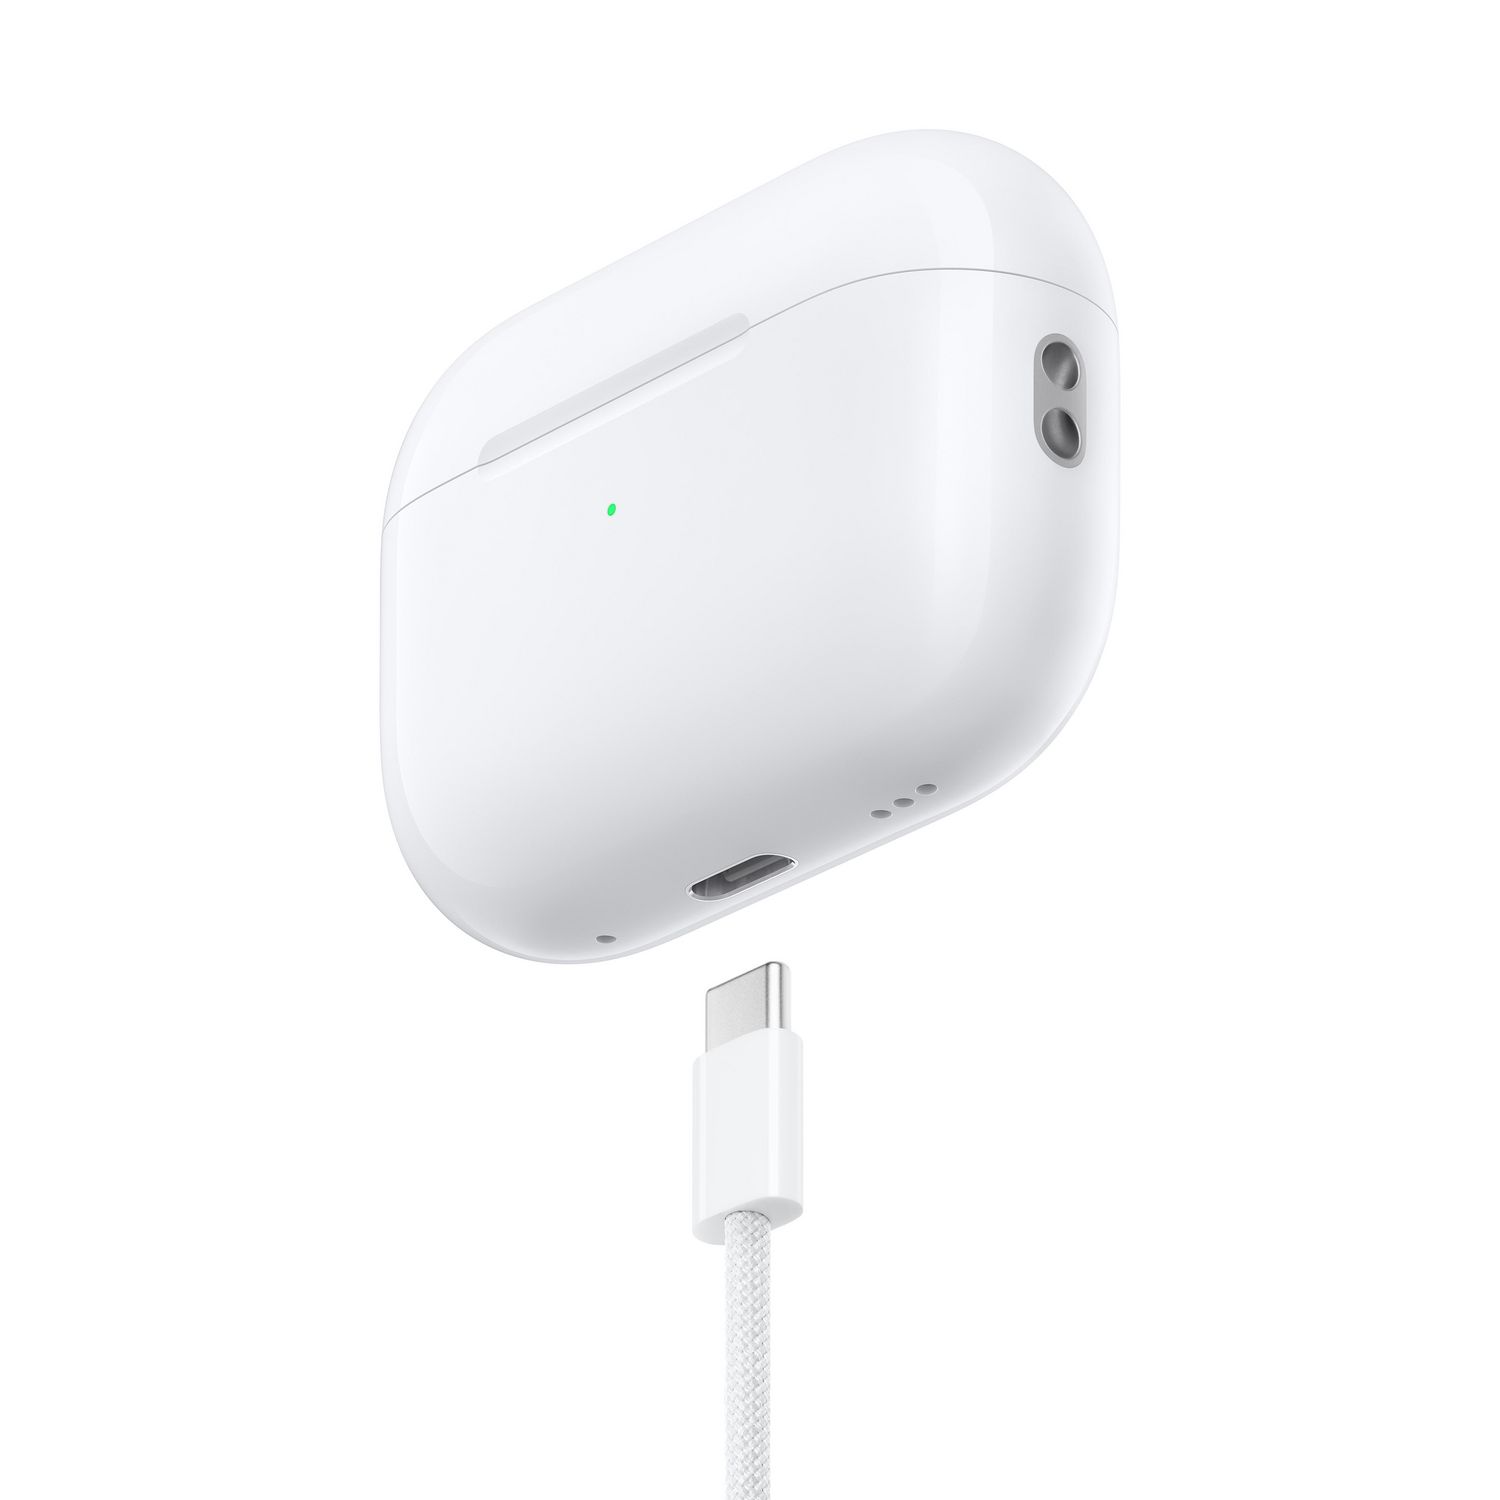 AirPods Pro (2nd generation) with USB-C, Adaptive Audio. Now